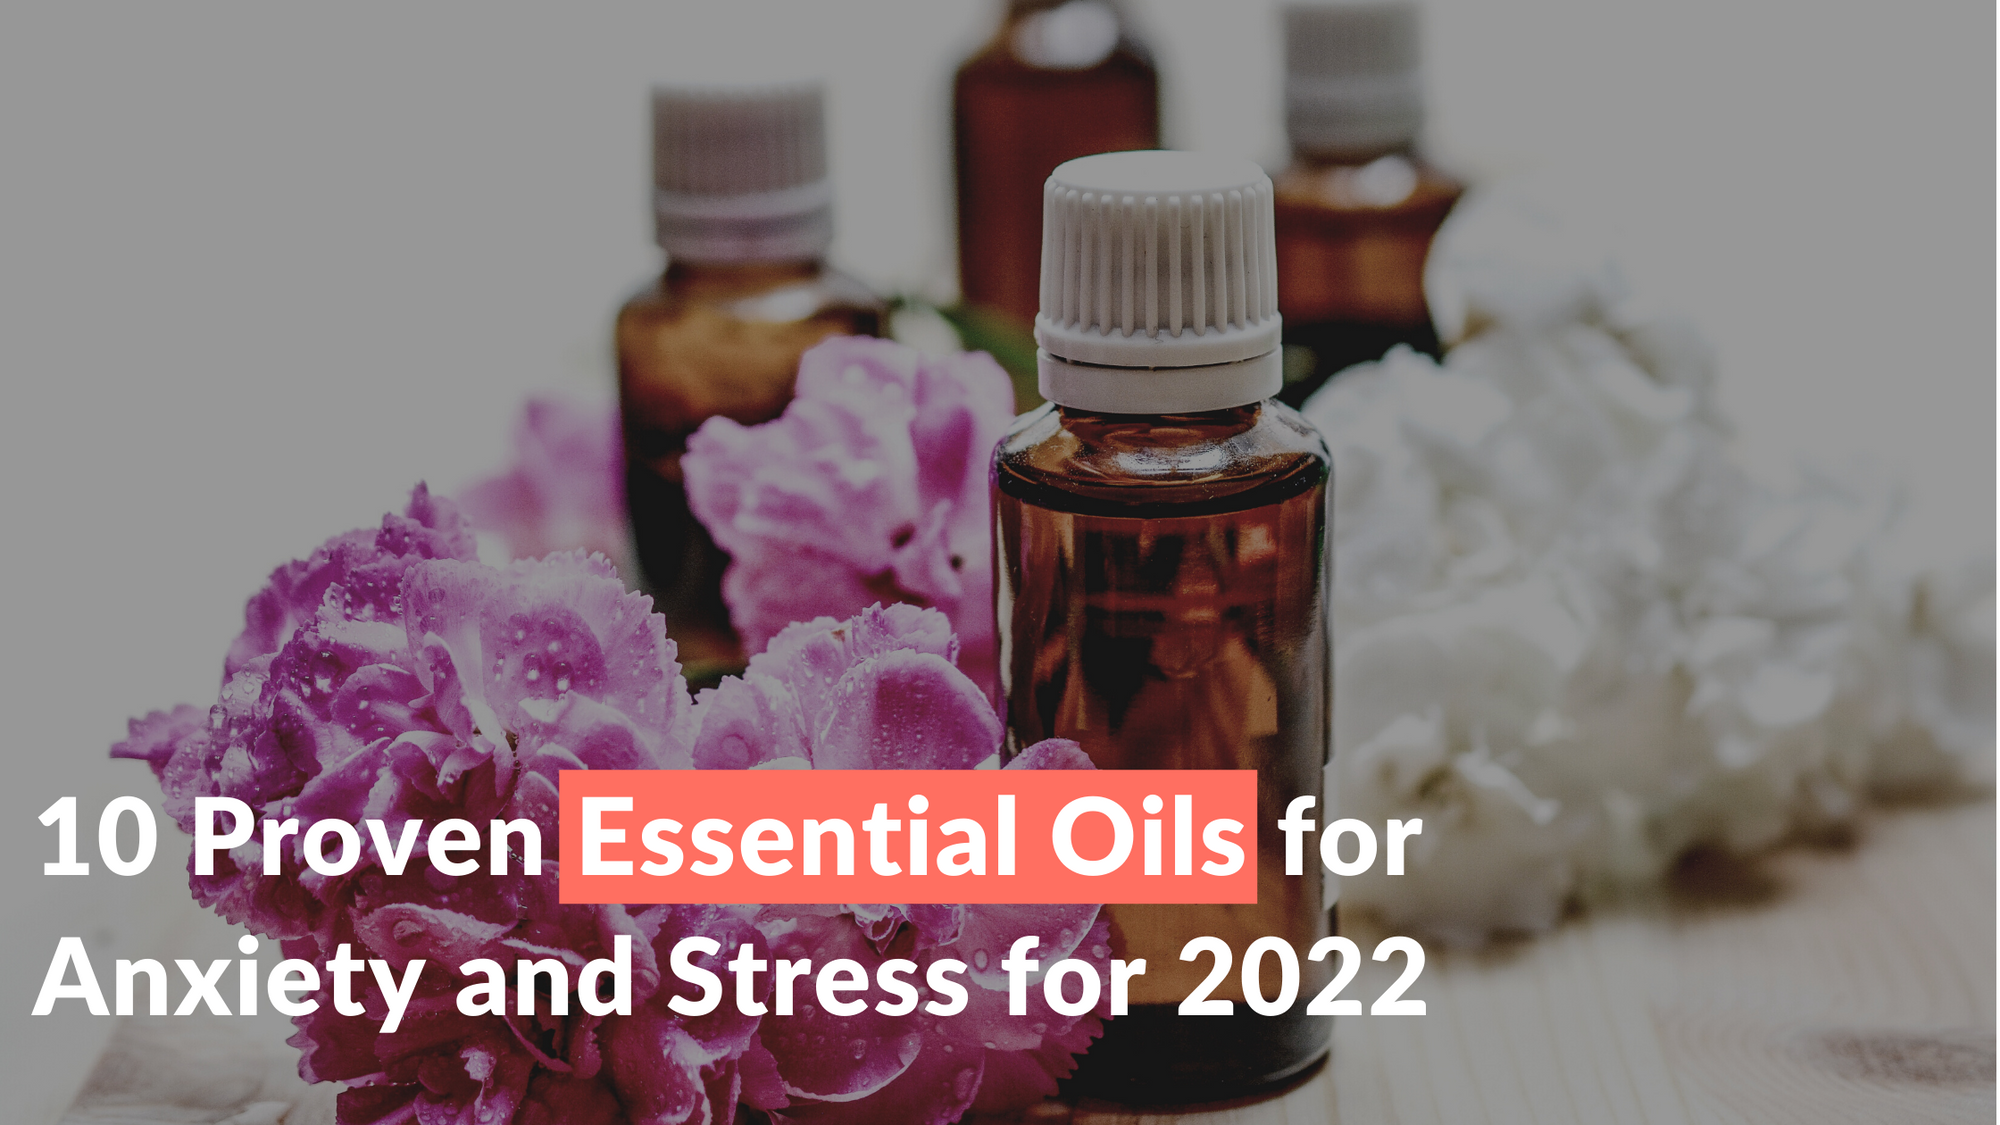 Essential oil bottles surrounded by pink and white flowers with the title "10 Proven Essential Oils For Anxiety and Stress for 2022"